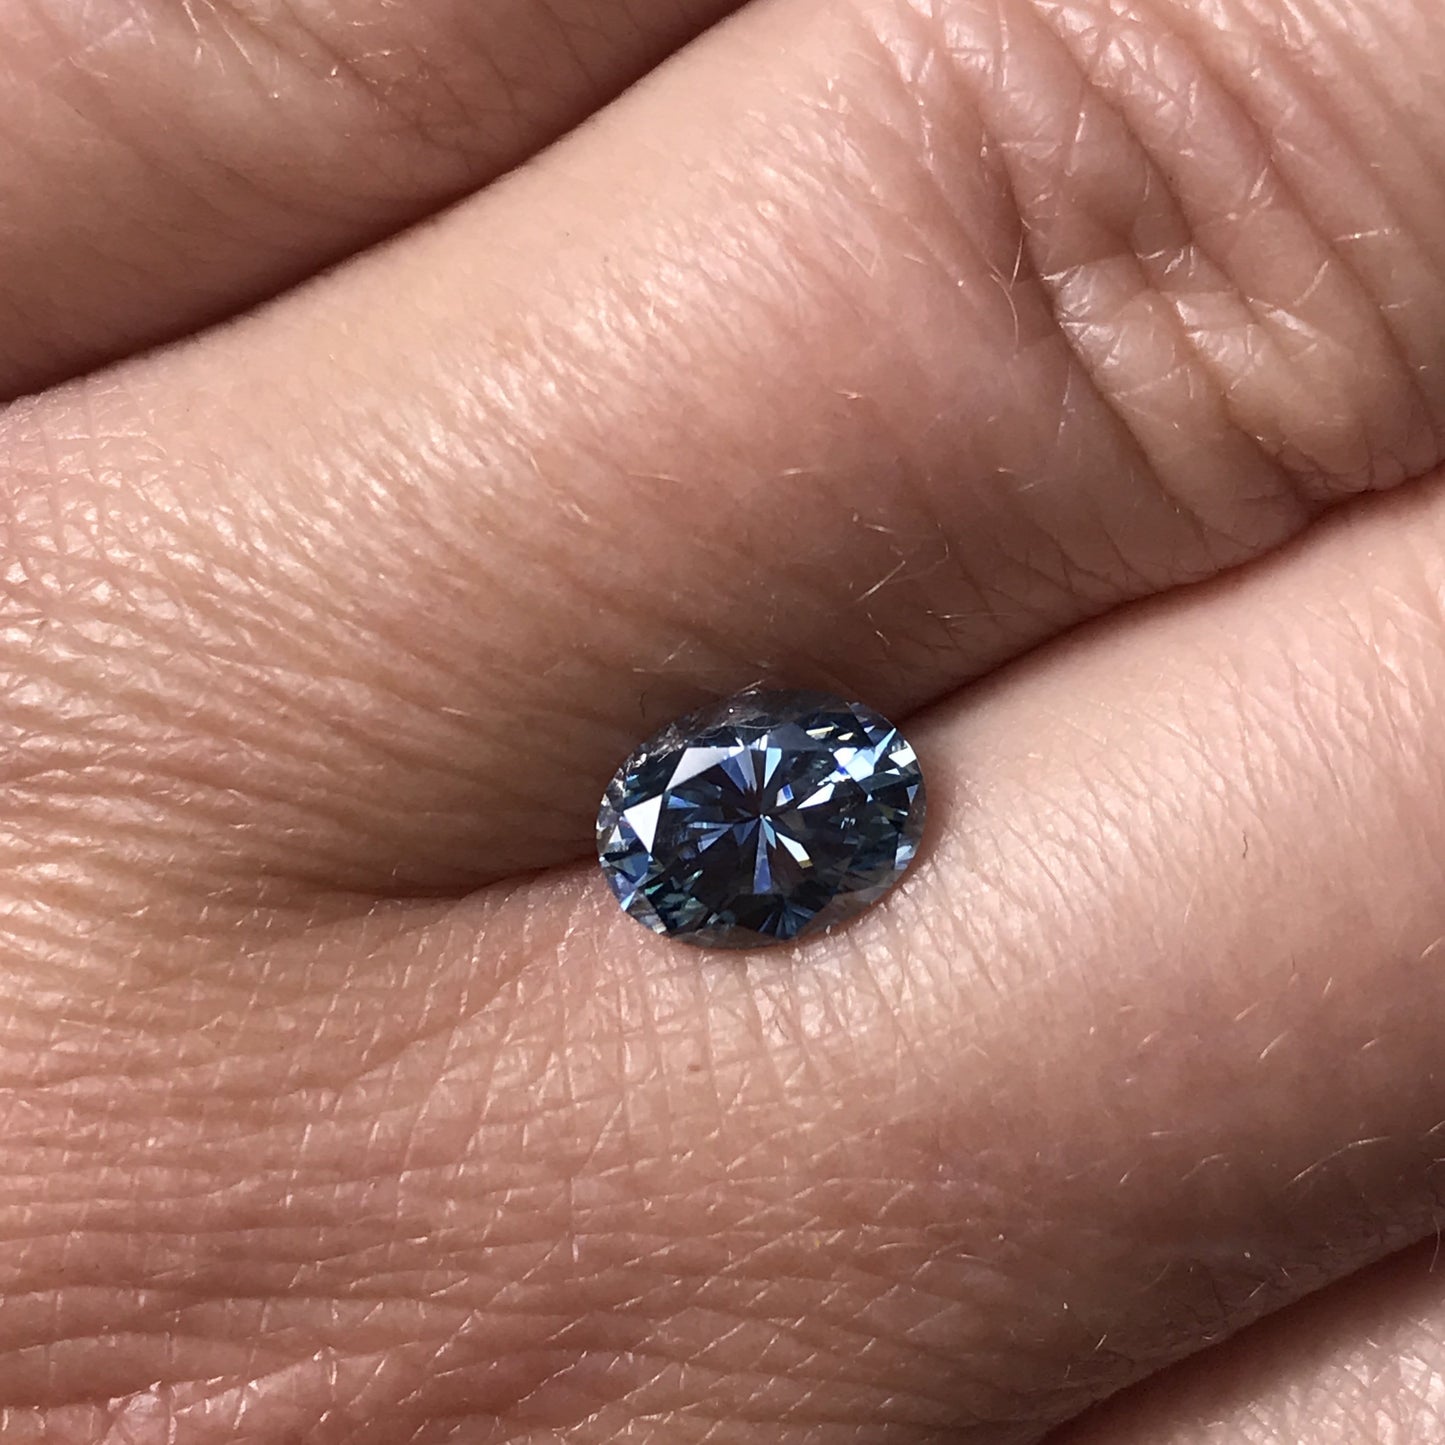 Oval Blue-Gray Moissanite Loose Stone Loose Gemstone by Nodeform